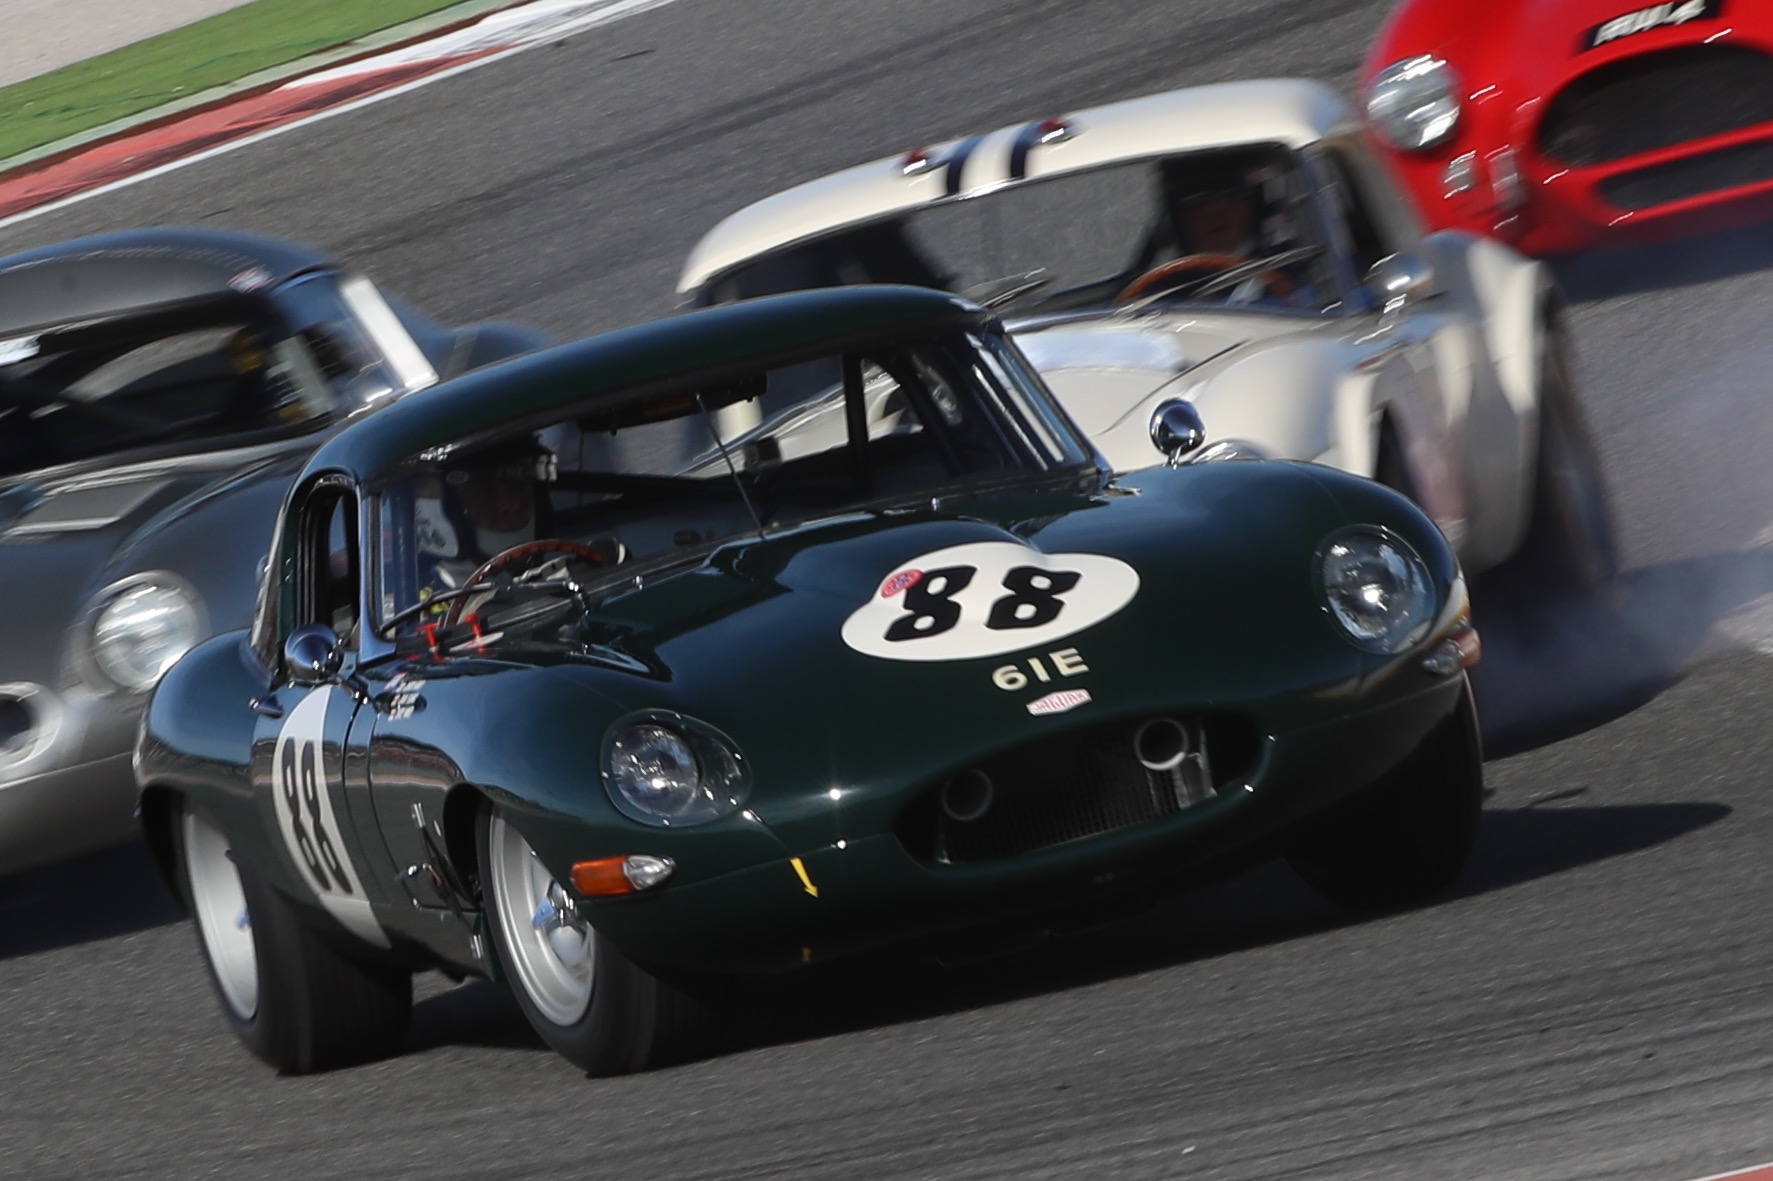 The JD Classics Jaguar E-Type fended off fierce competition to claim a well-deserved victory in the GT & Sports Car Cup race.